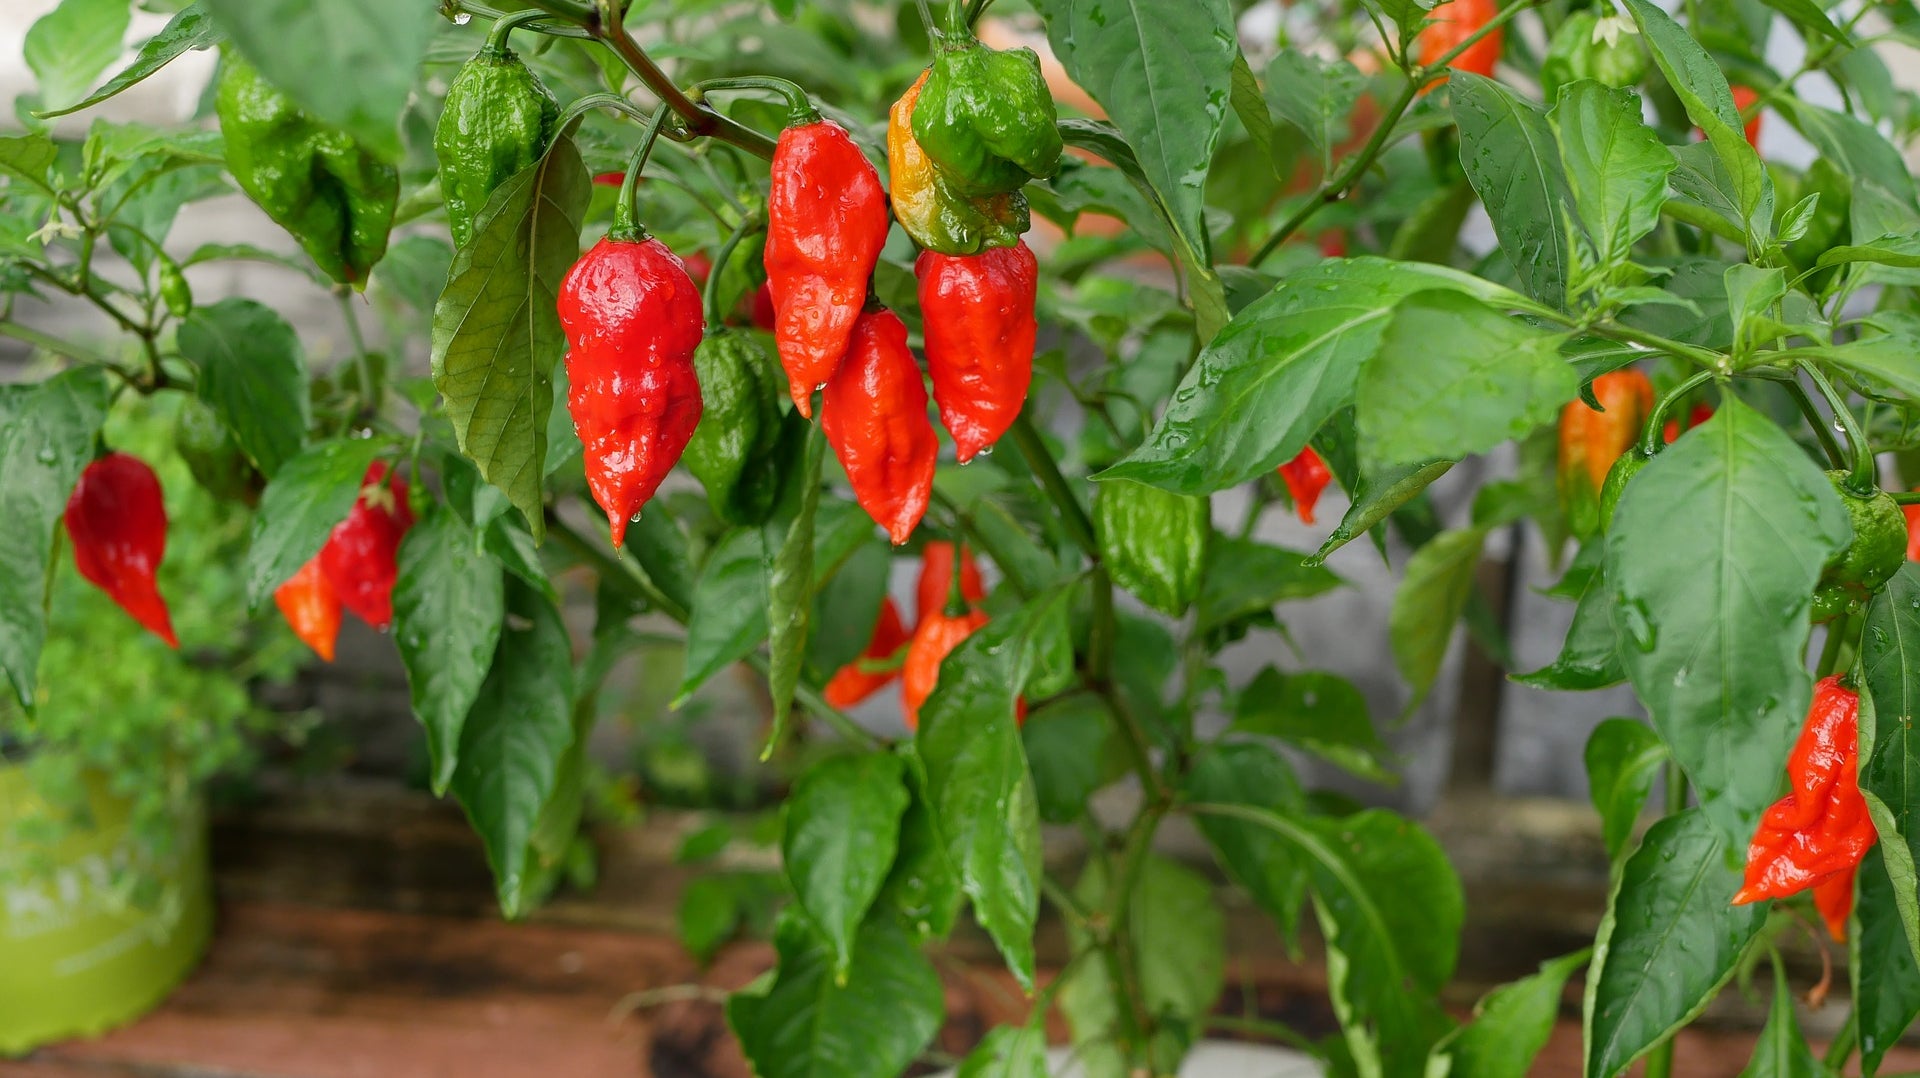 HOW TO PLANT A HOT PEPPER GARDEN ?